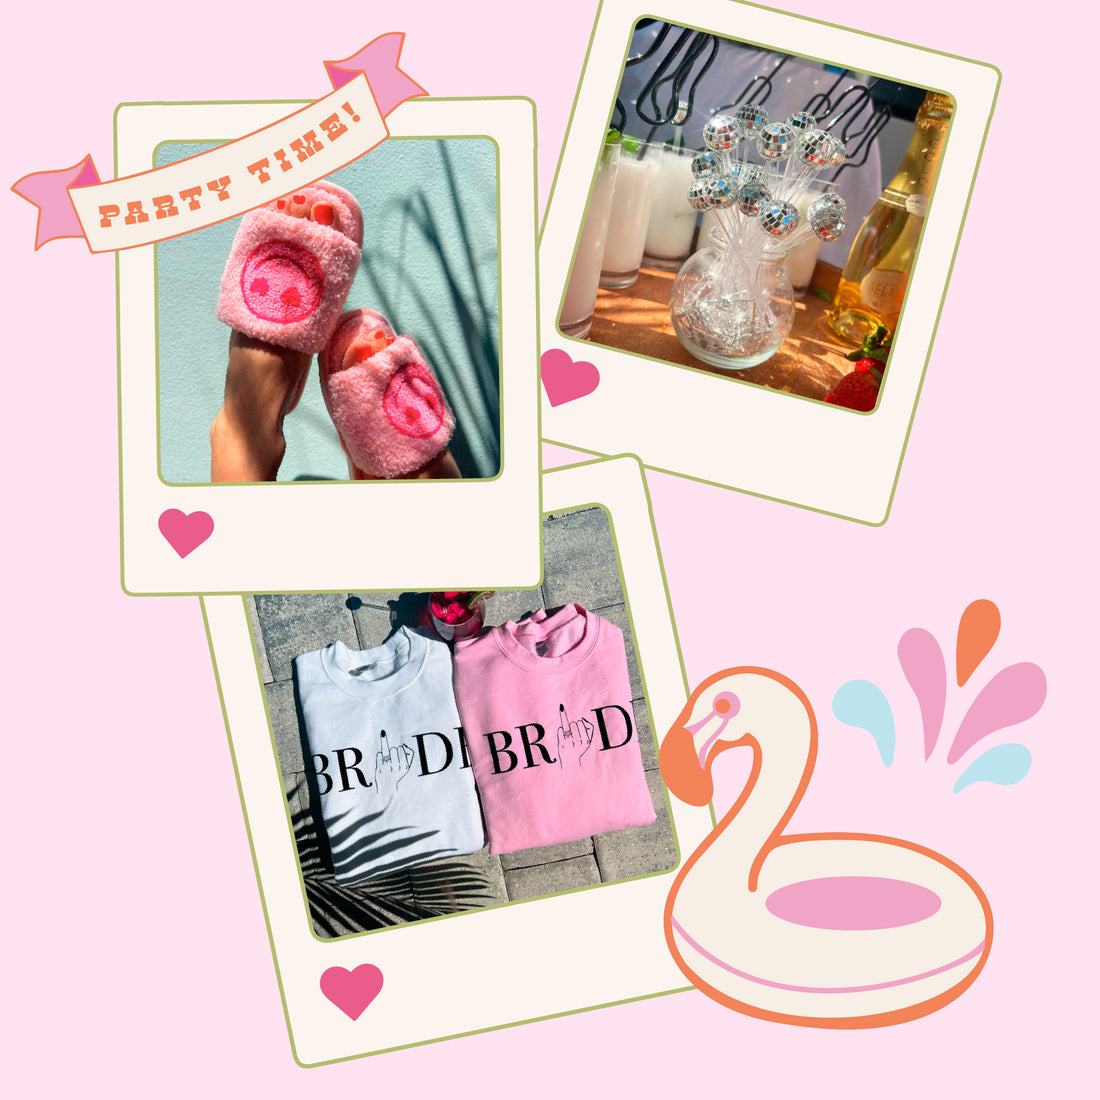 Let the Fun Begin! Unveiling the Top 5 Bachelorette Party Themes for an Energetic Celebration